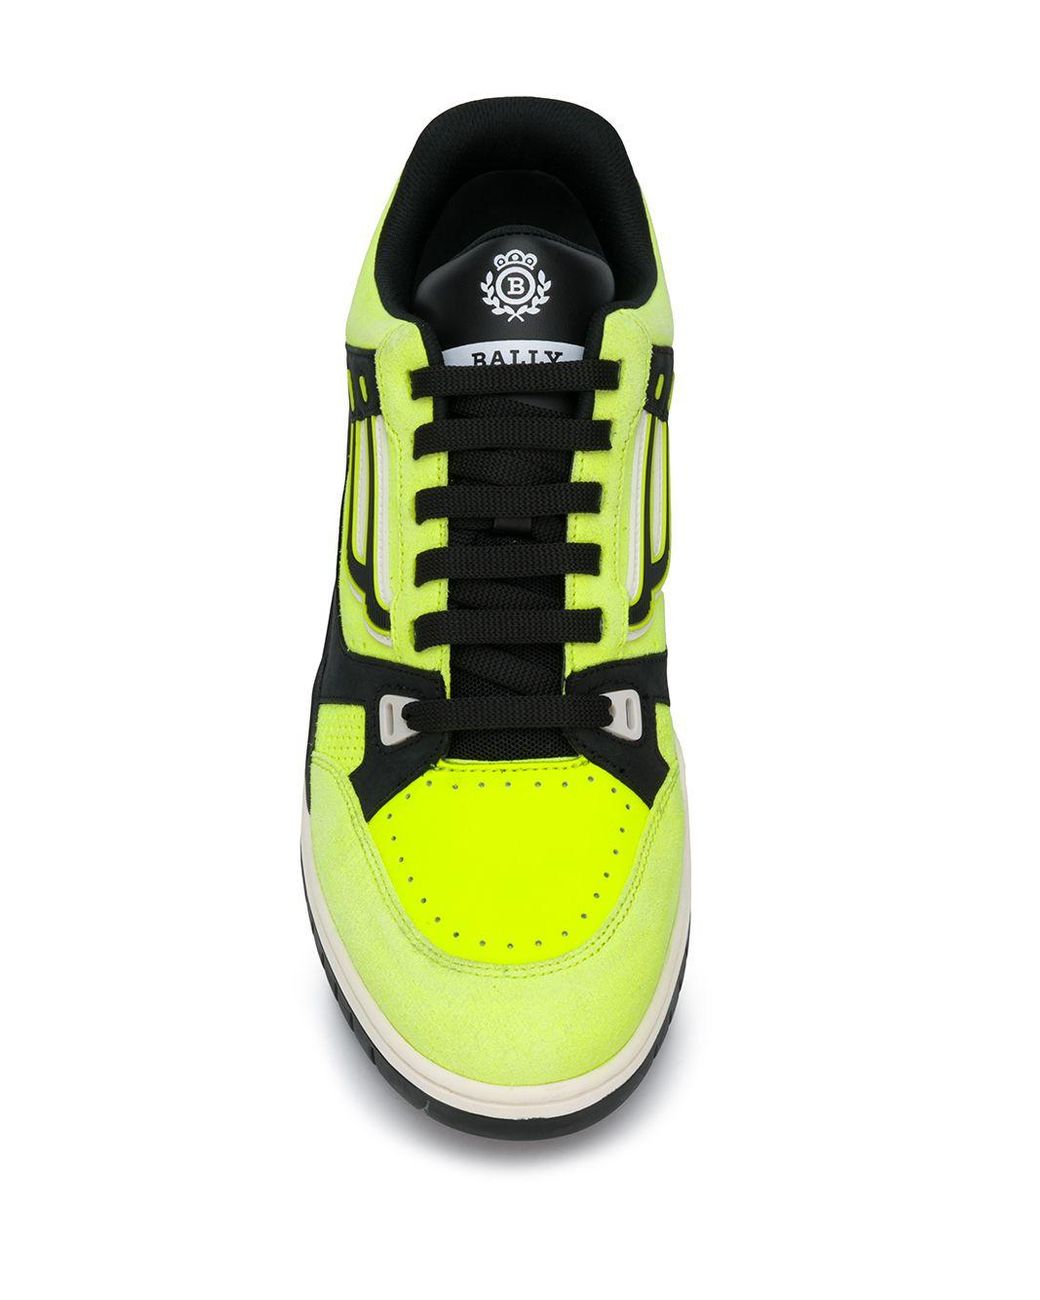 Bally Leather Champion Low-top Sneakers in Neon Yellow (Yellow) for Men -  Save 10% - Lyst